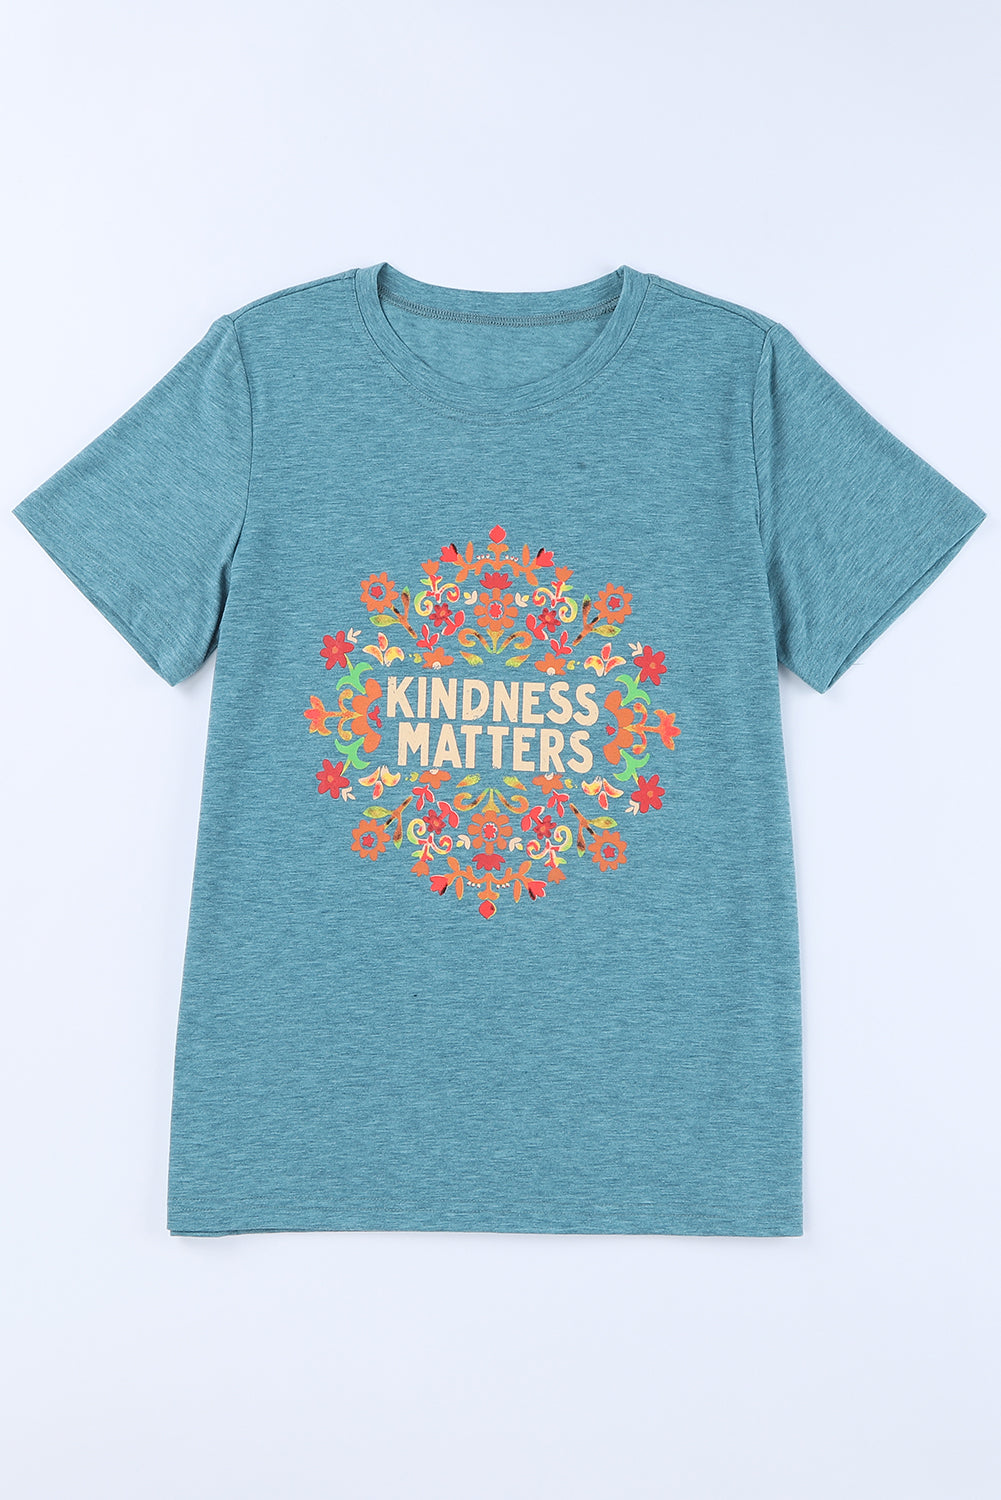 KINDNESS MATTERS Flower Graphic Tee - Blue / L - T-Shirts - Shirts & Tops - 9 - 2024